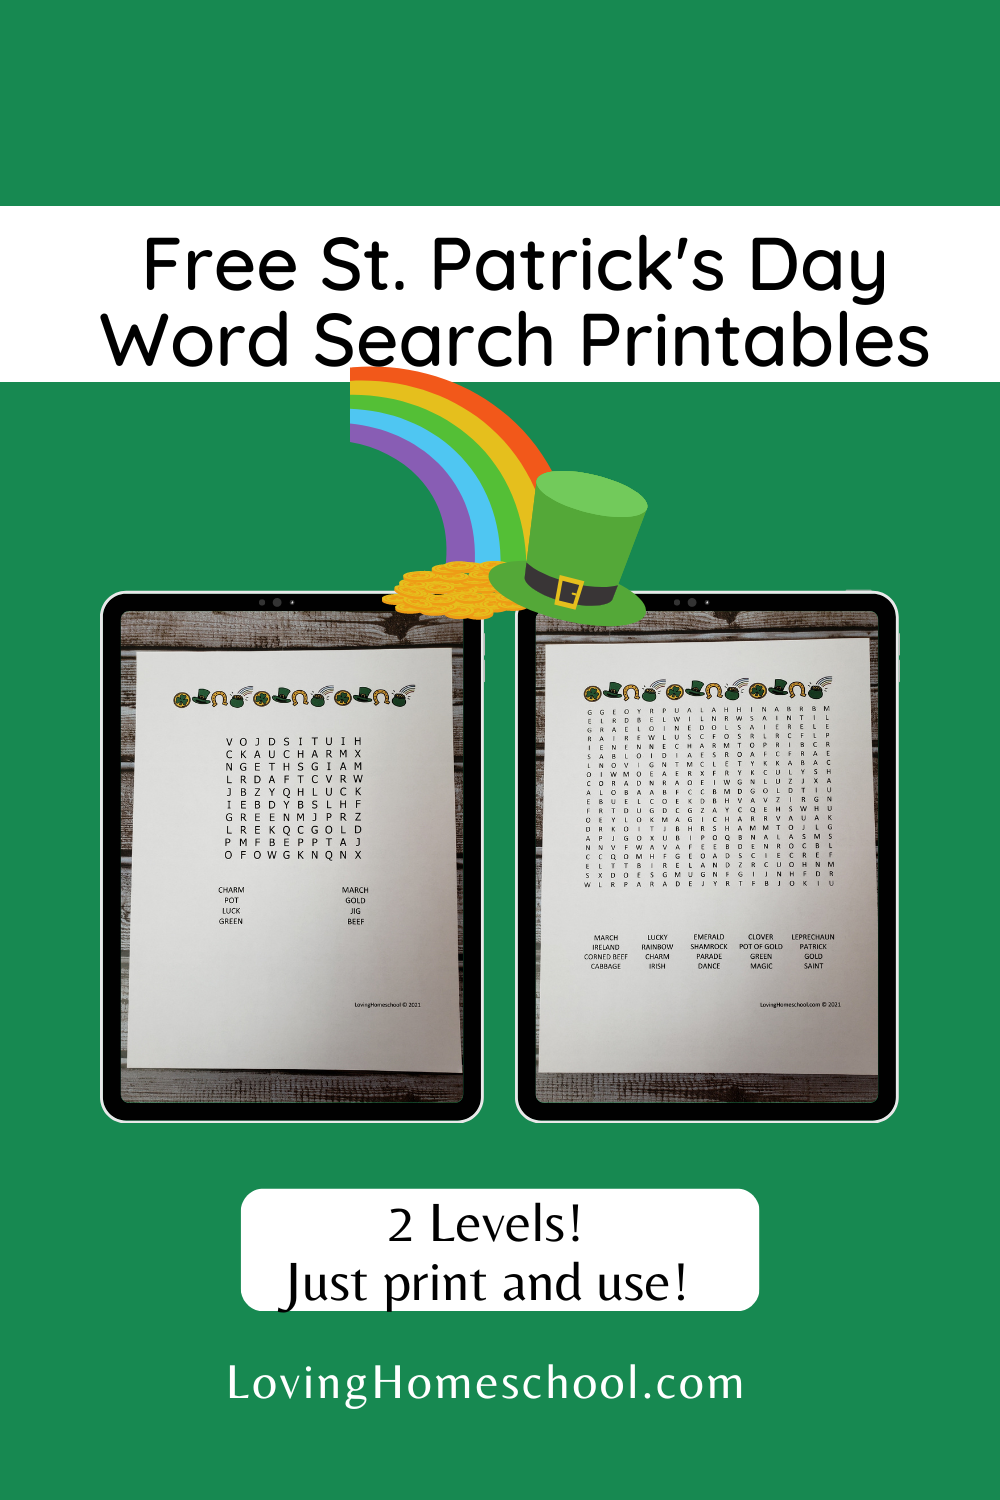 St. Patrick's Day Word Search Pinterest Pin